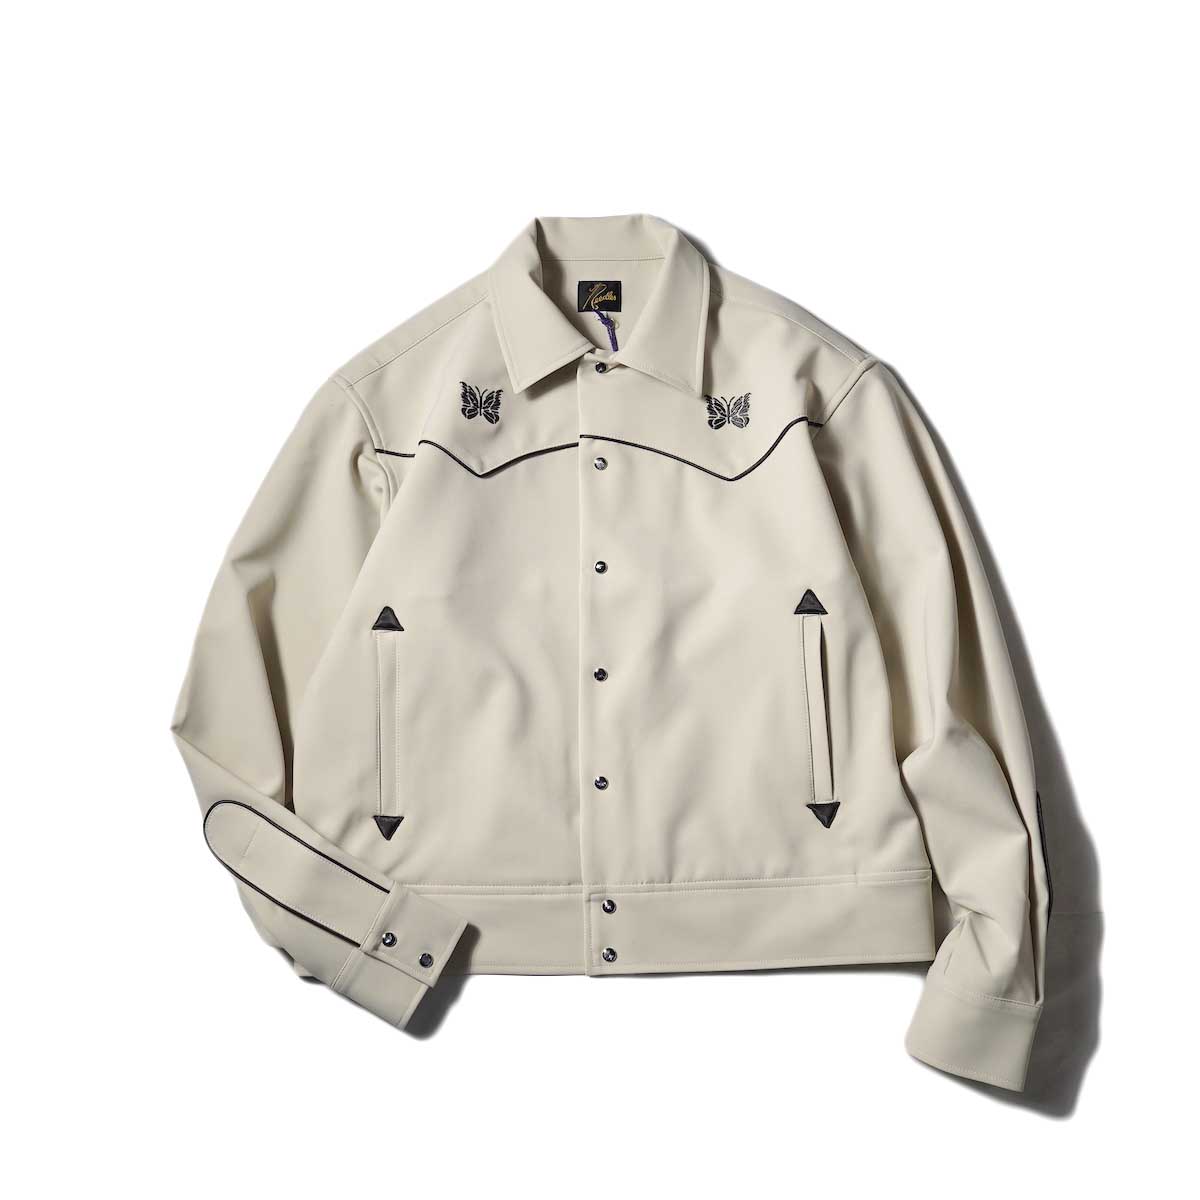 Needles / Piping Cowboy Jacket -PE/PU Double Cloth (Beige)